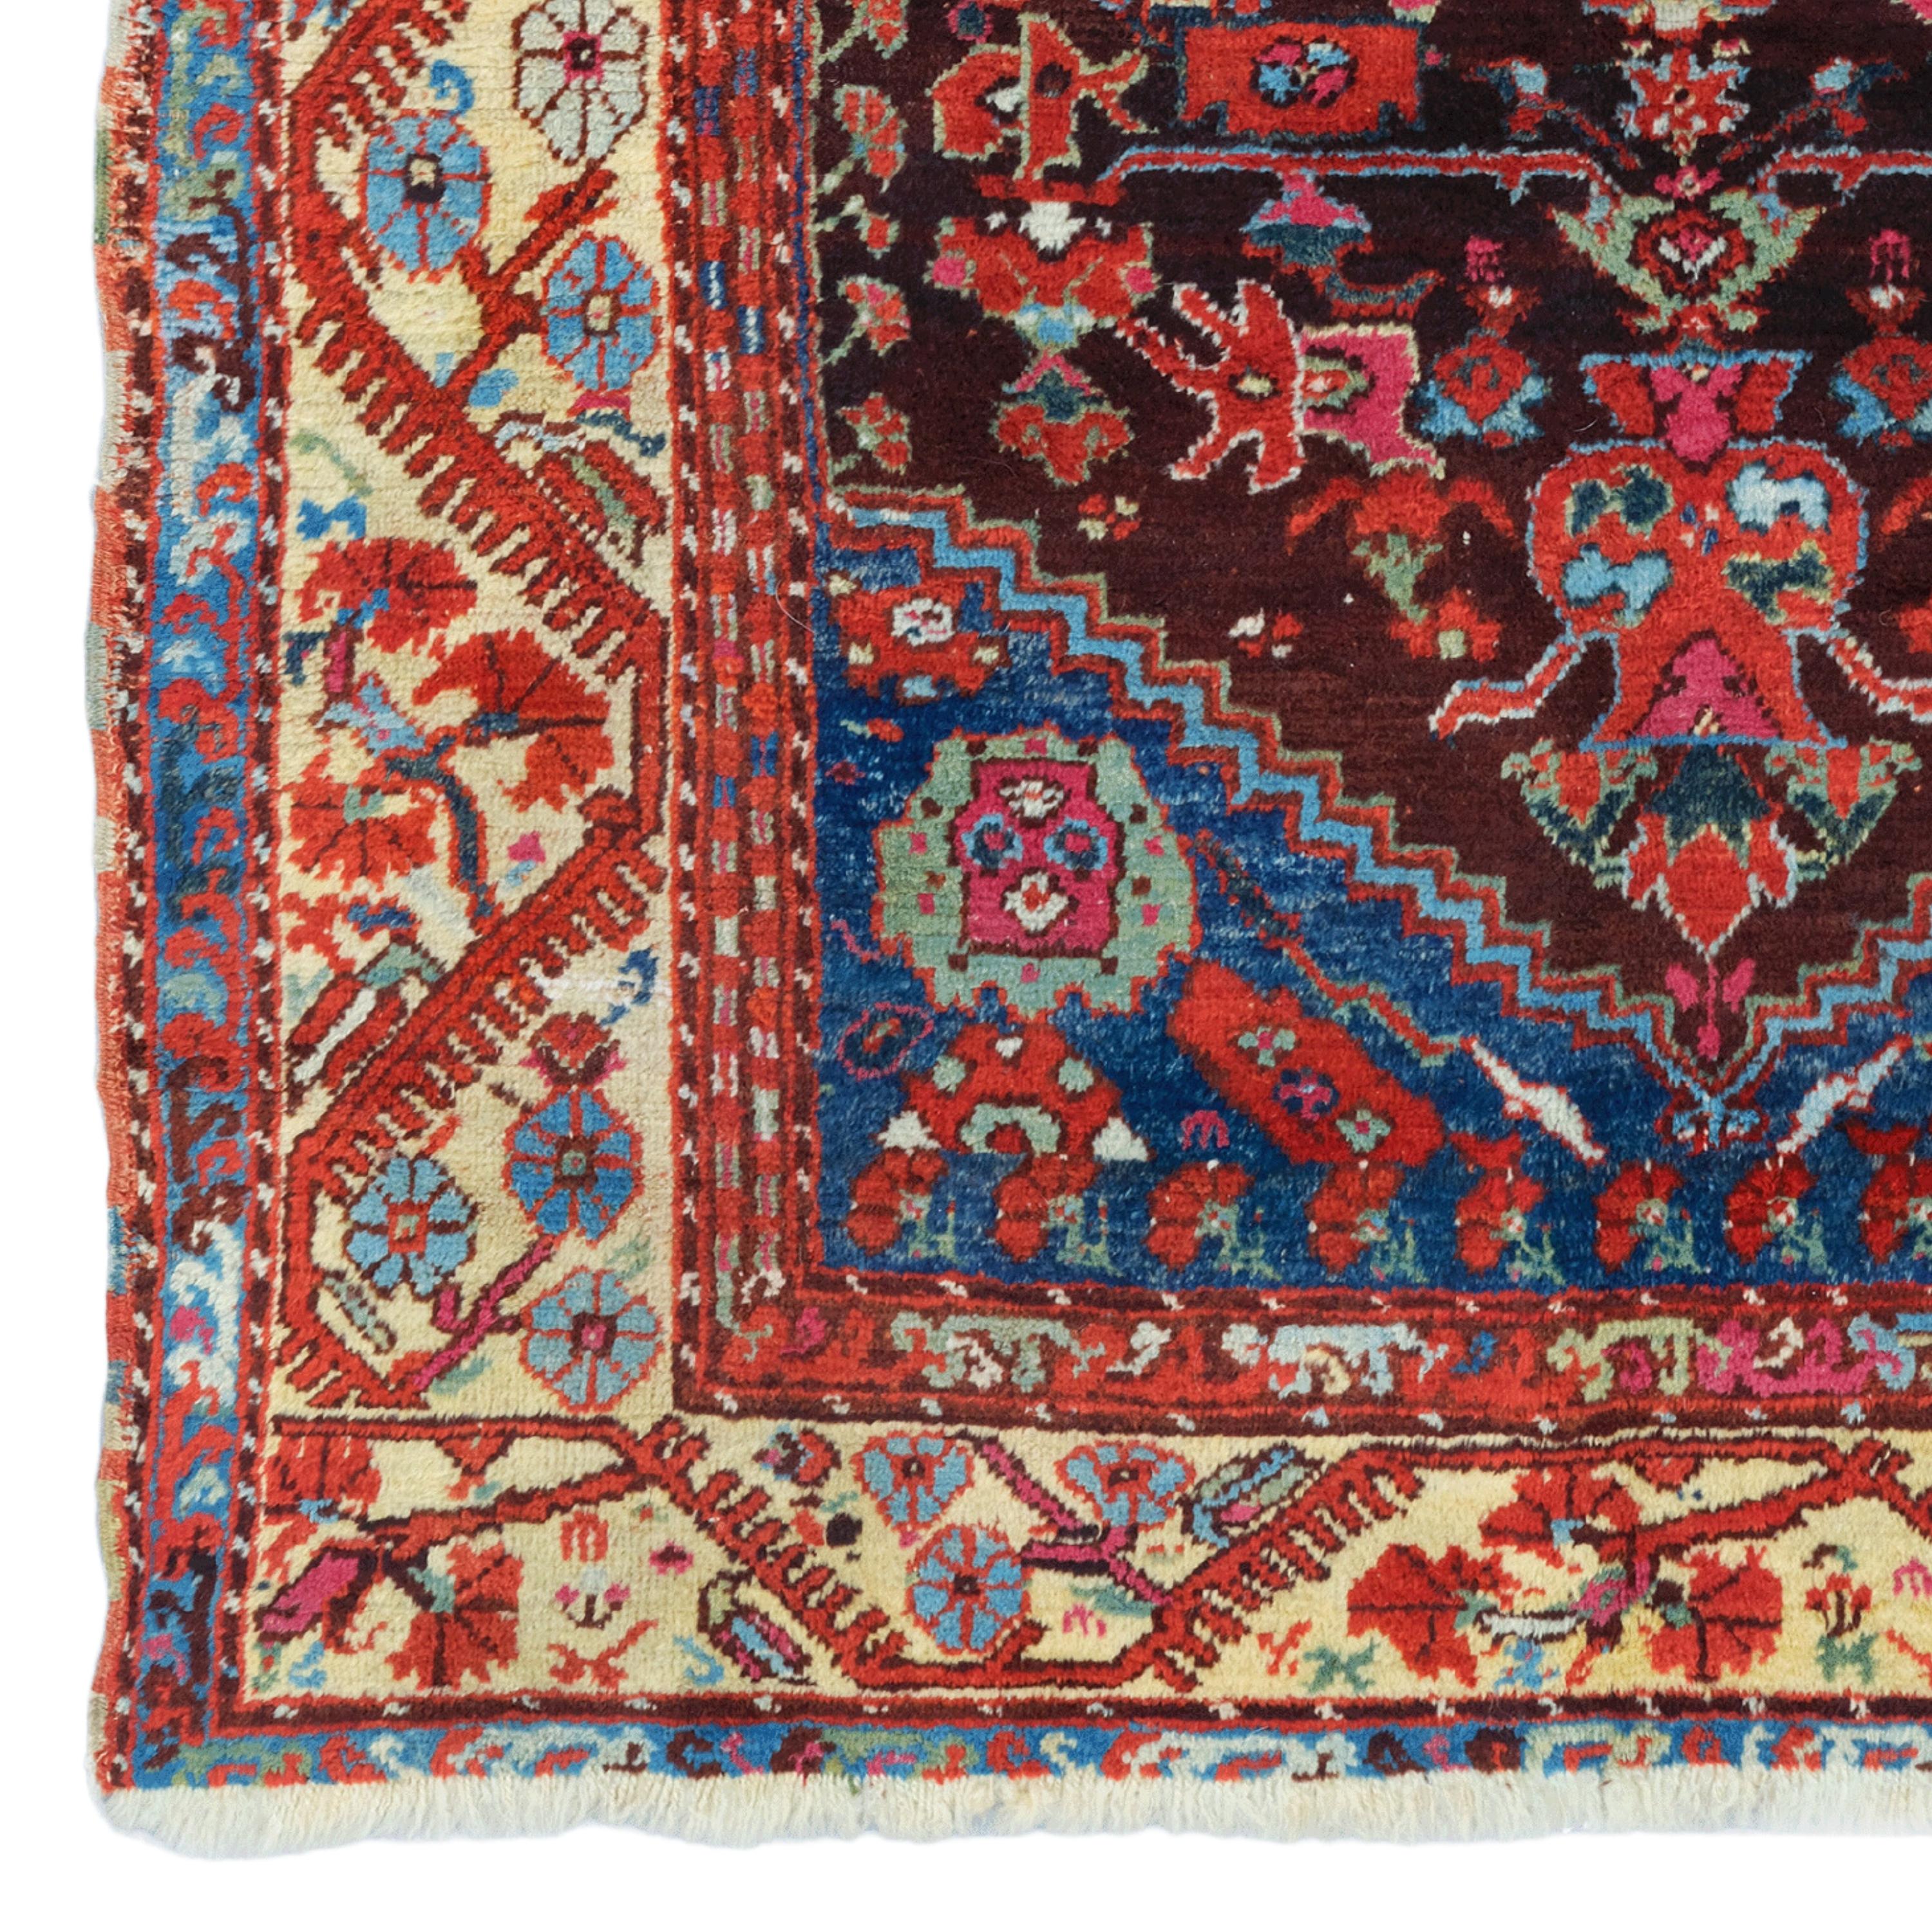 The Elegance of Traditional Texture This traditional Turkish Kula carpet is known for its rich color palette and distinctive patterns. The carpet has a large central medallion design and is surrounded by floral motifs and geometric patterns specific